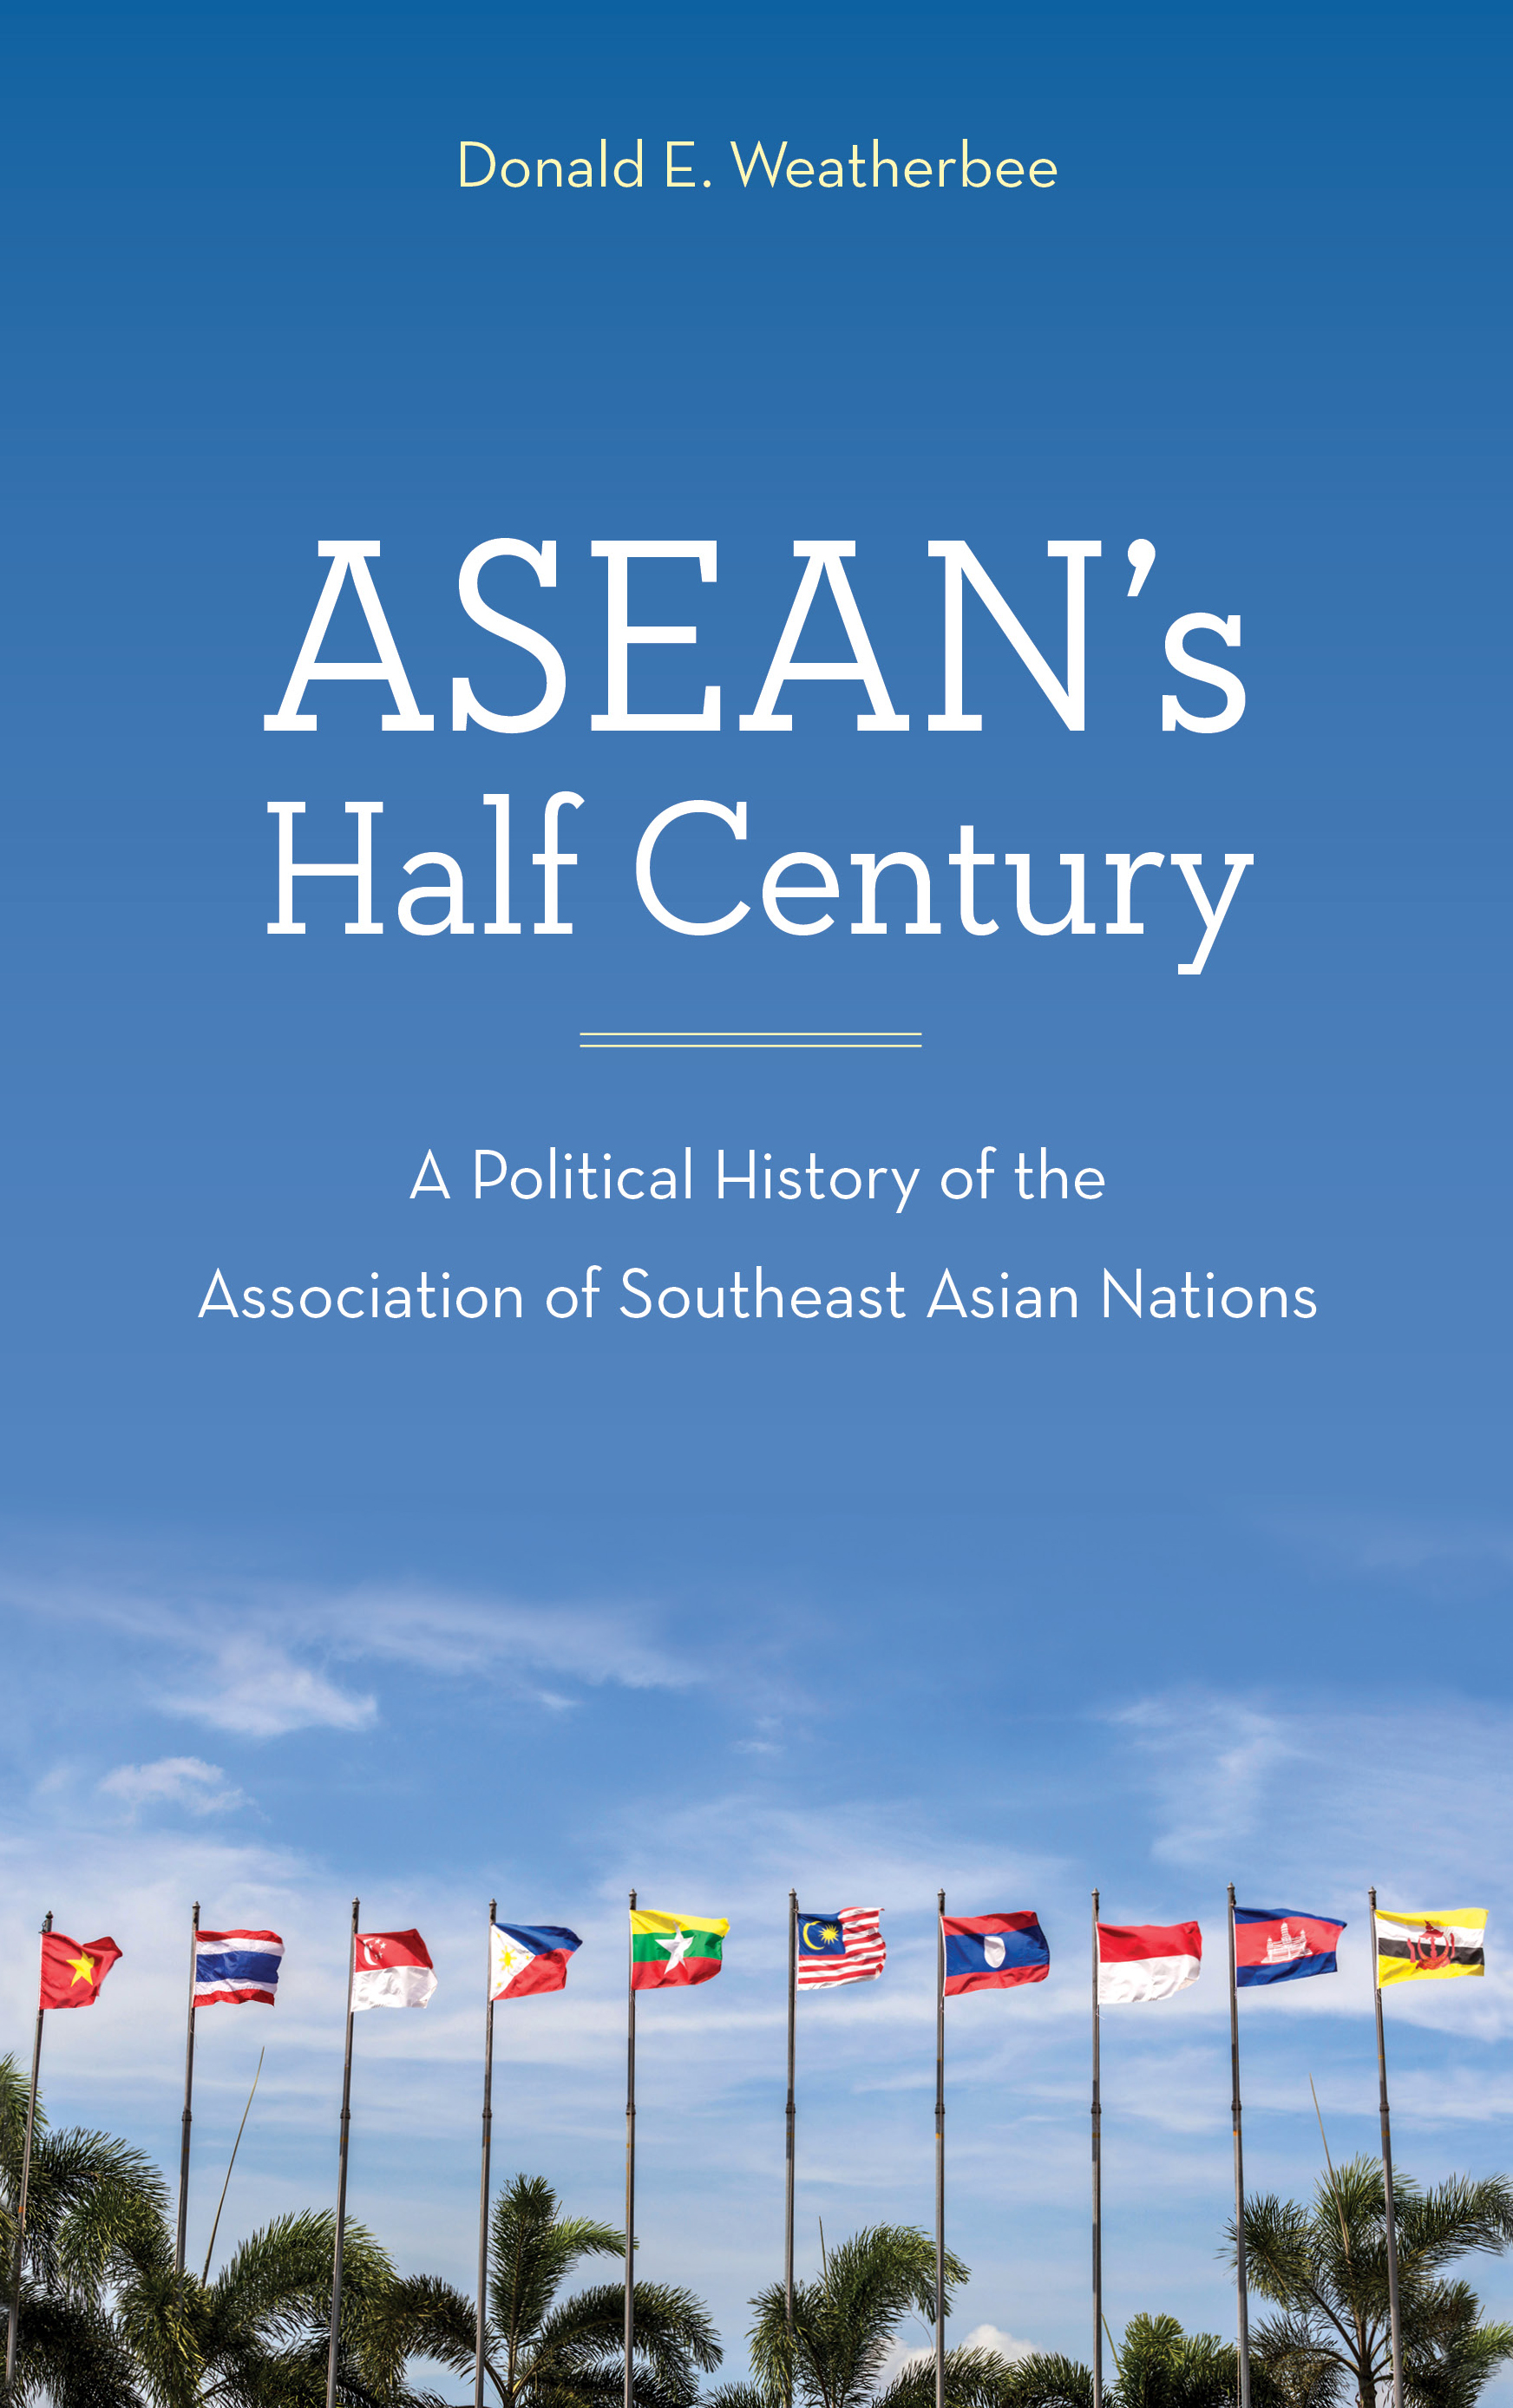 ASEAN's Half Century: A Political History of the Association of Southeast Asian Nations